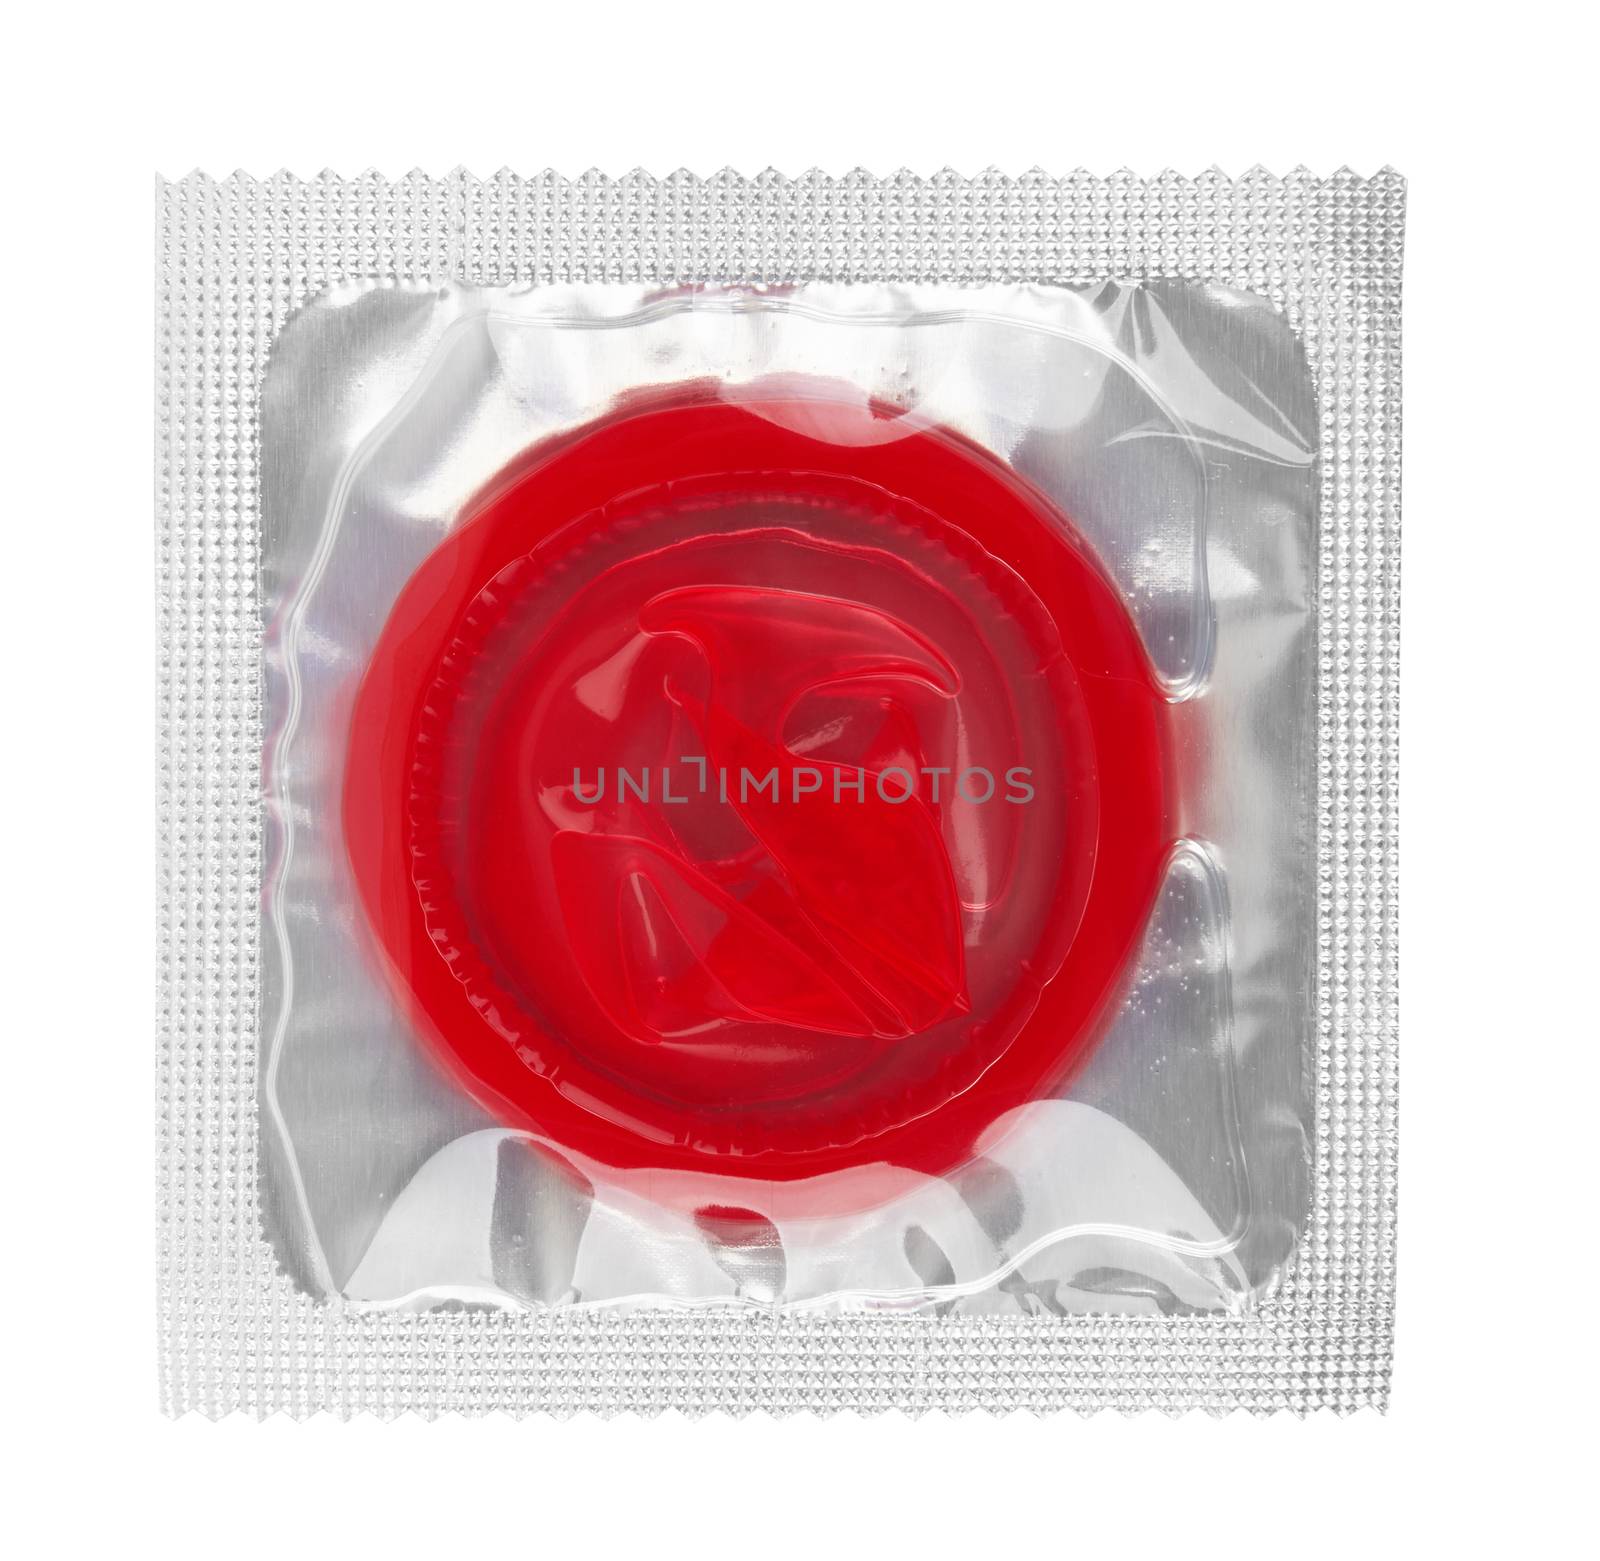 Condom isolated on a white background